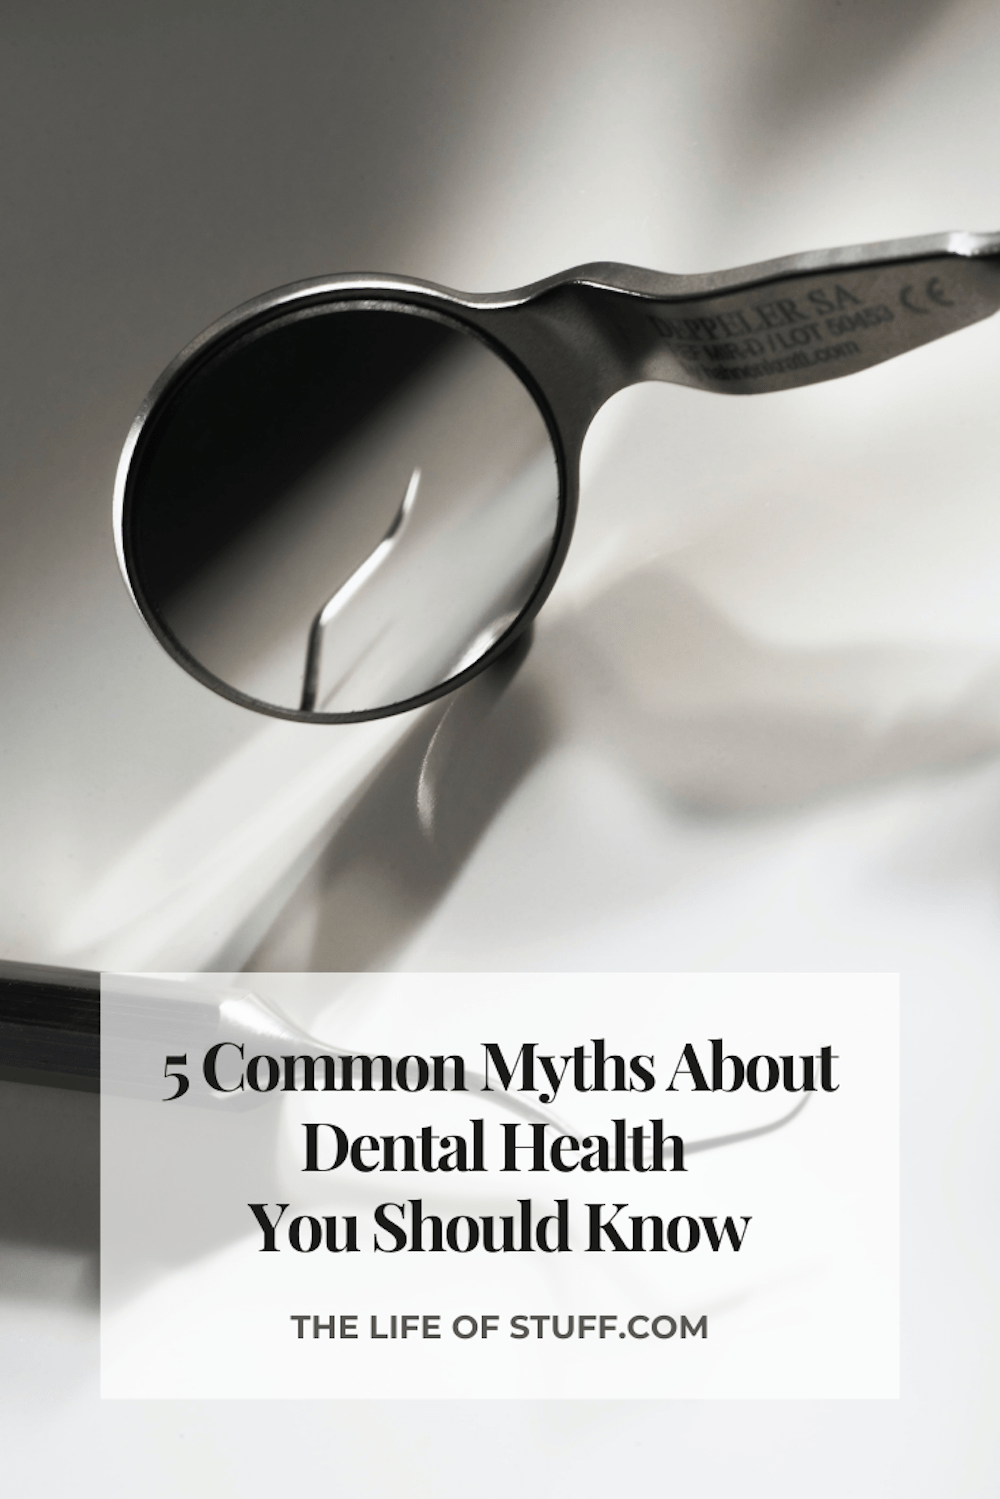 5 Common Myths About Dental Health You Should Know - The Life of Stuff